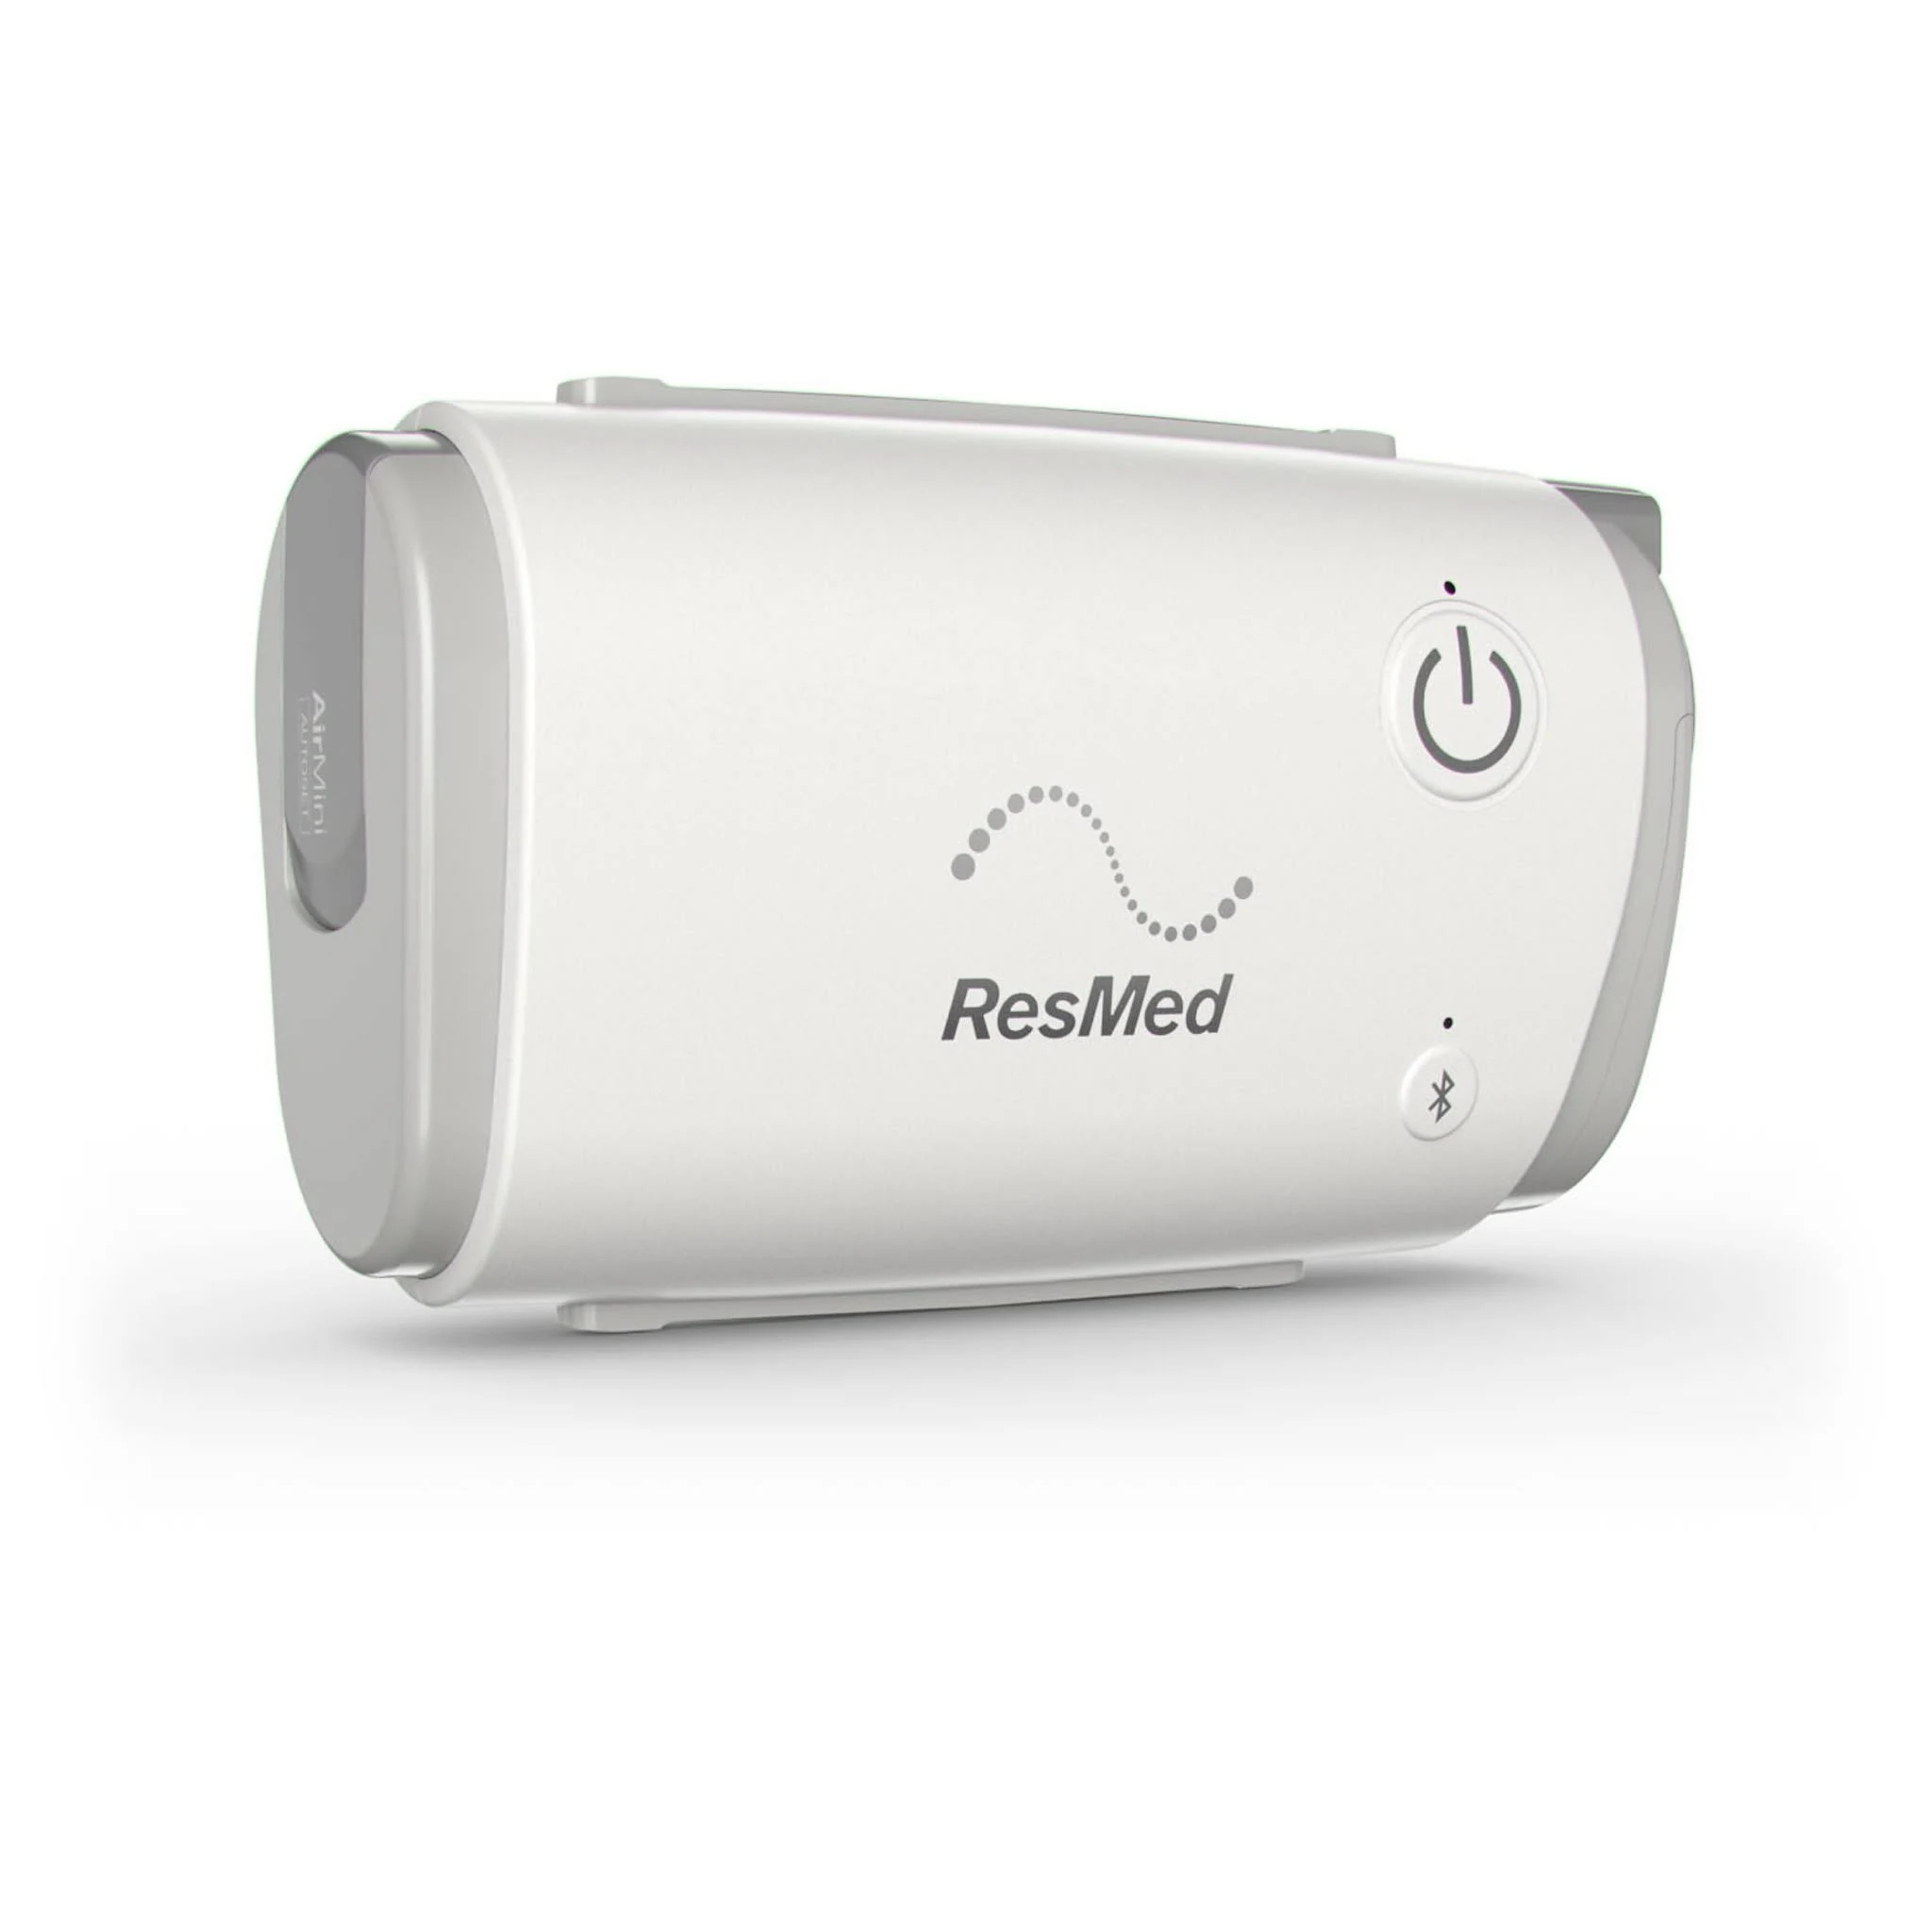 The ResMed AirMini travel CPAP packs ResMed's clinically proven CPAP technology with comfort and easy-use features in a sleek, portable, pocket-sized device ideal for traveling.